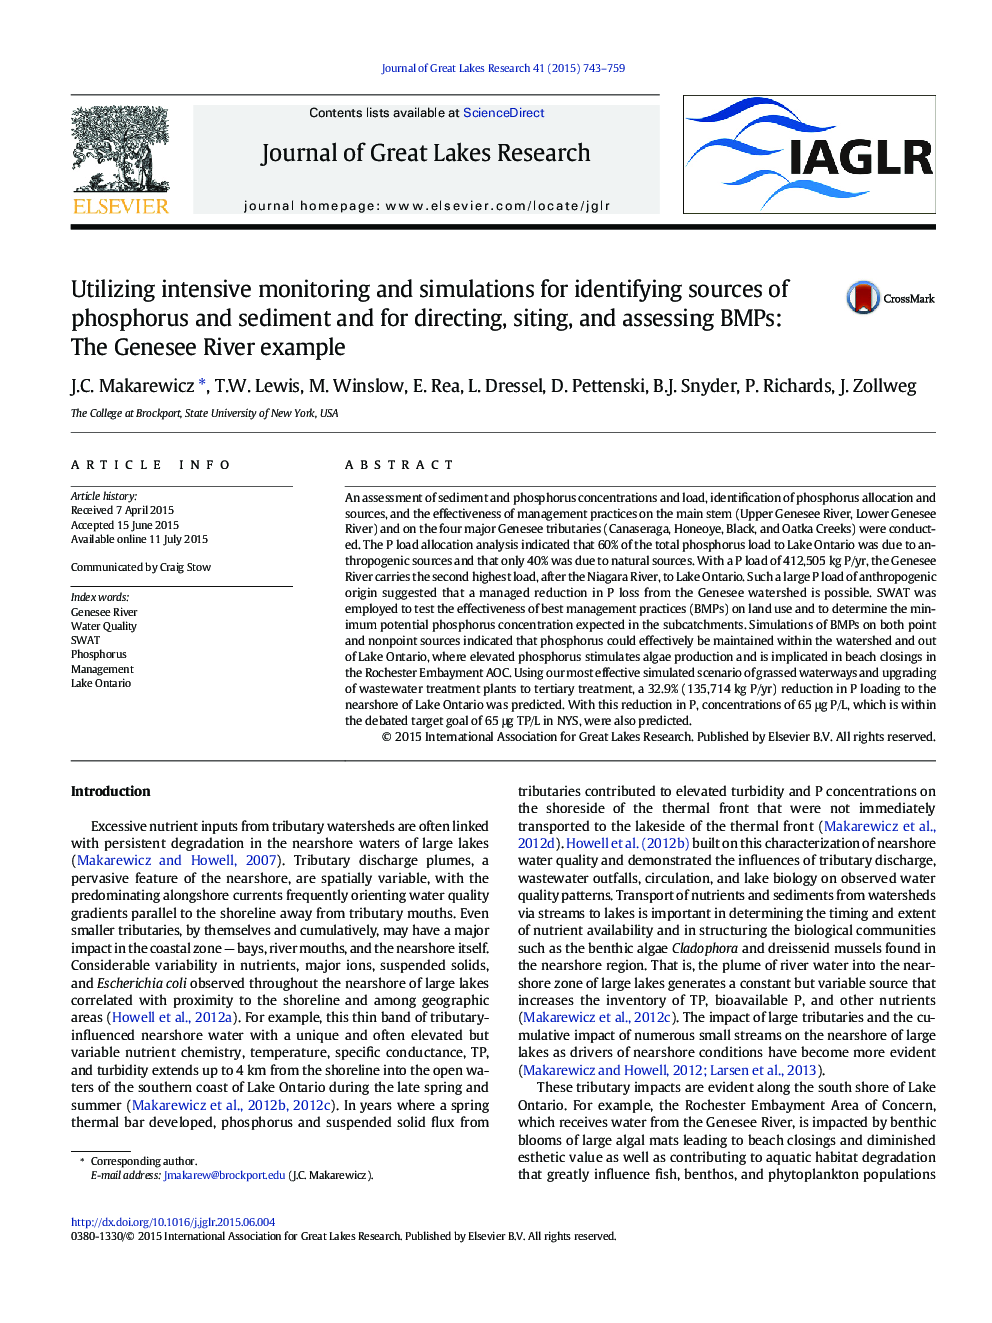 Utilizing intensive monitoring and simulations for identifying sources of phosphorus and sediment and for directing, siting, and assessing BMPs: The Genesee River example